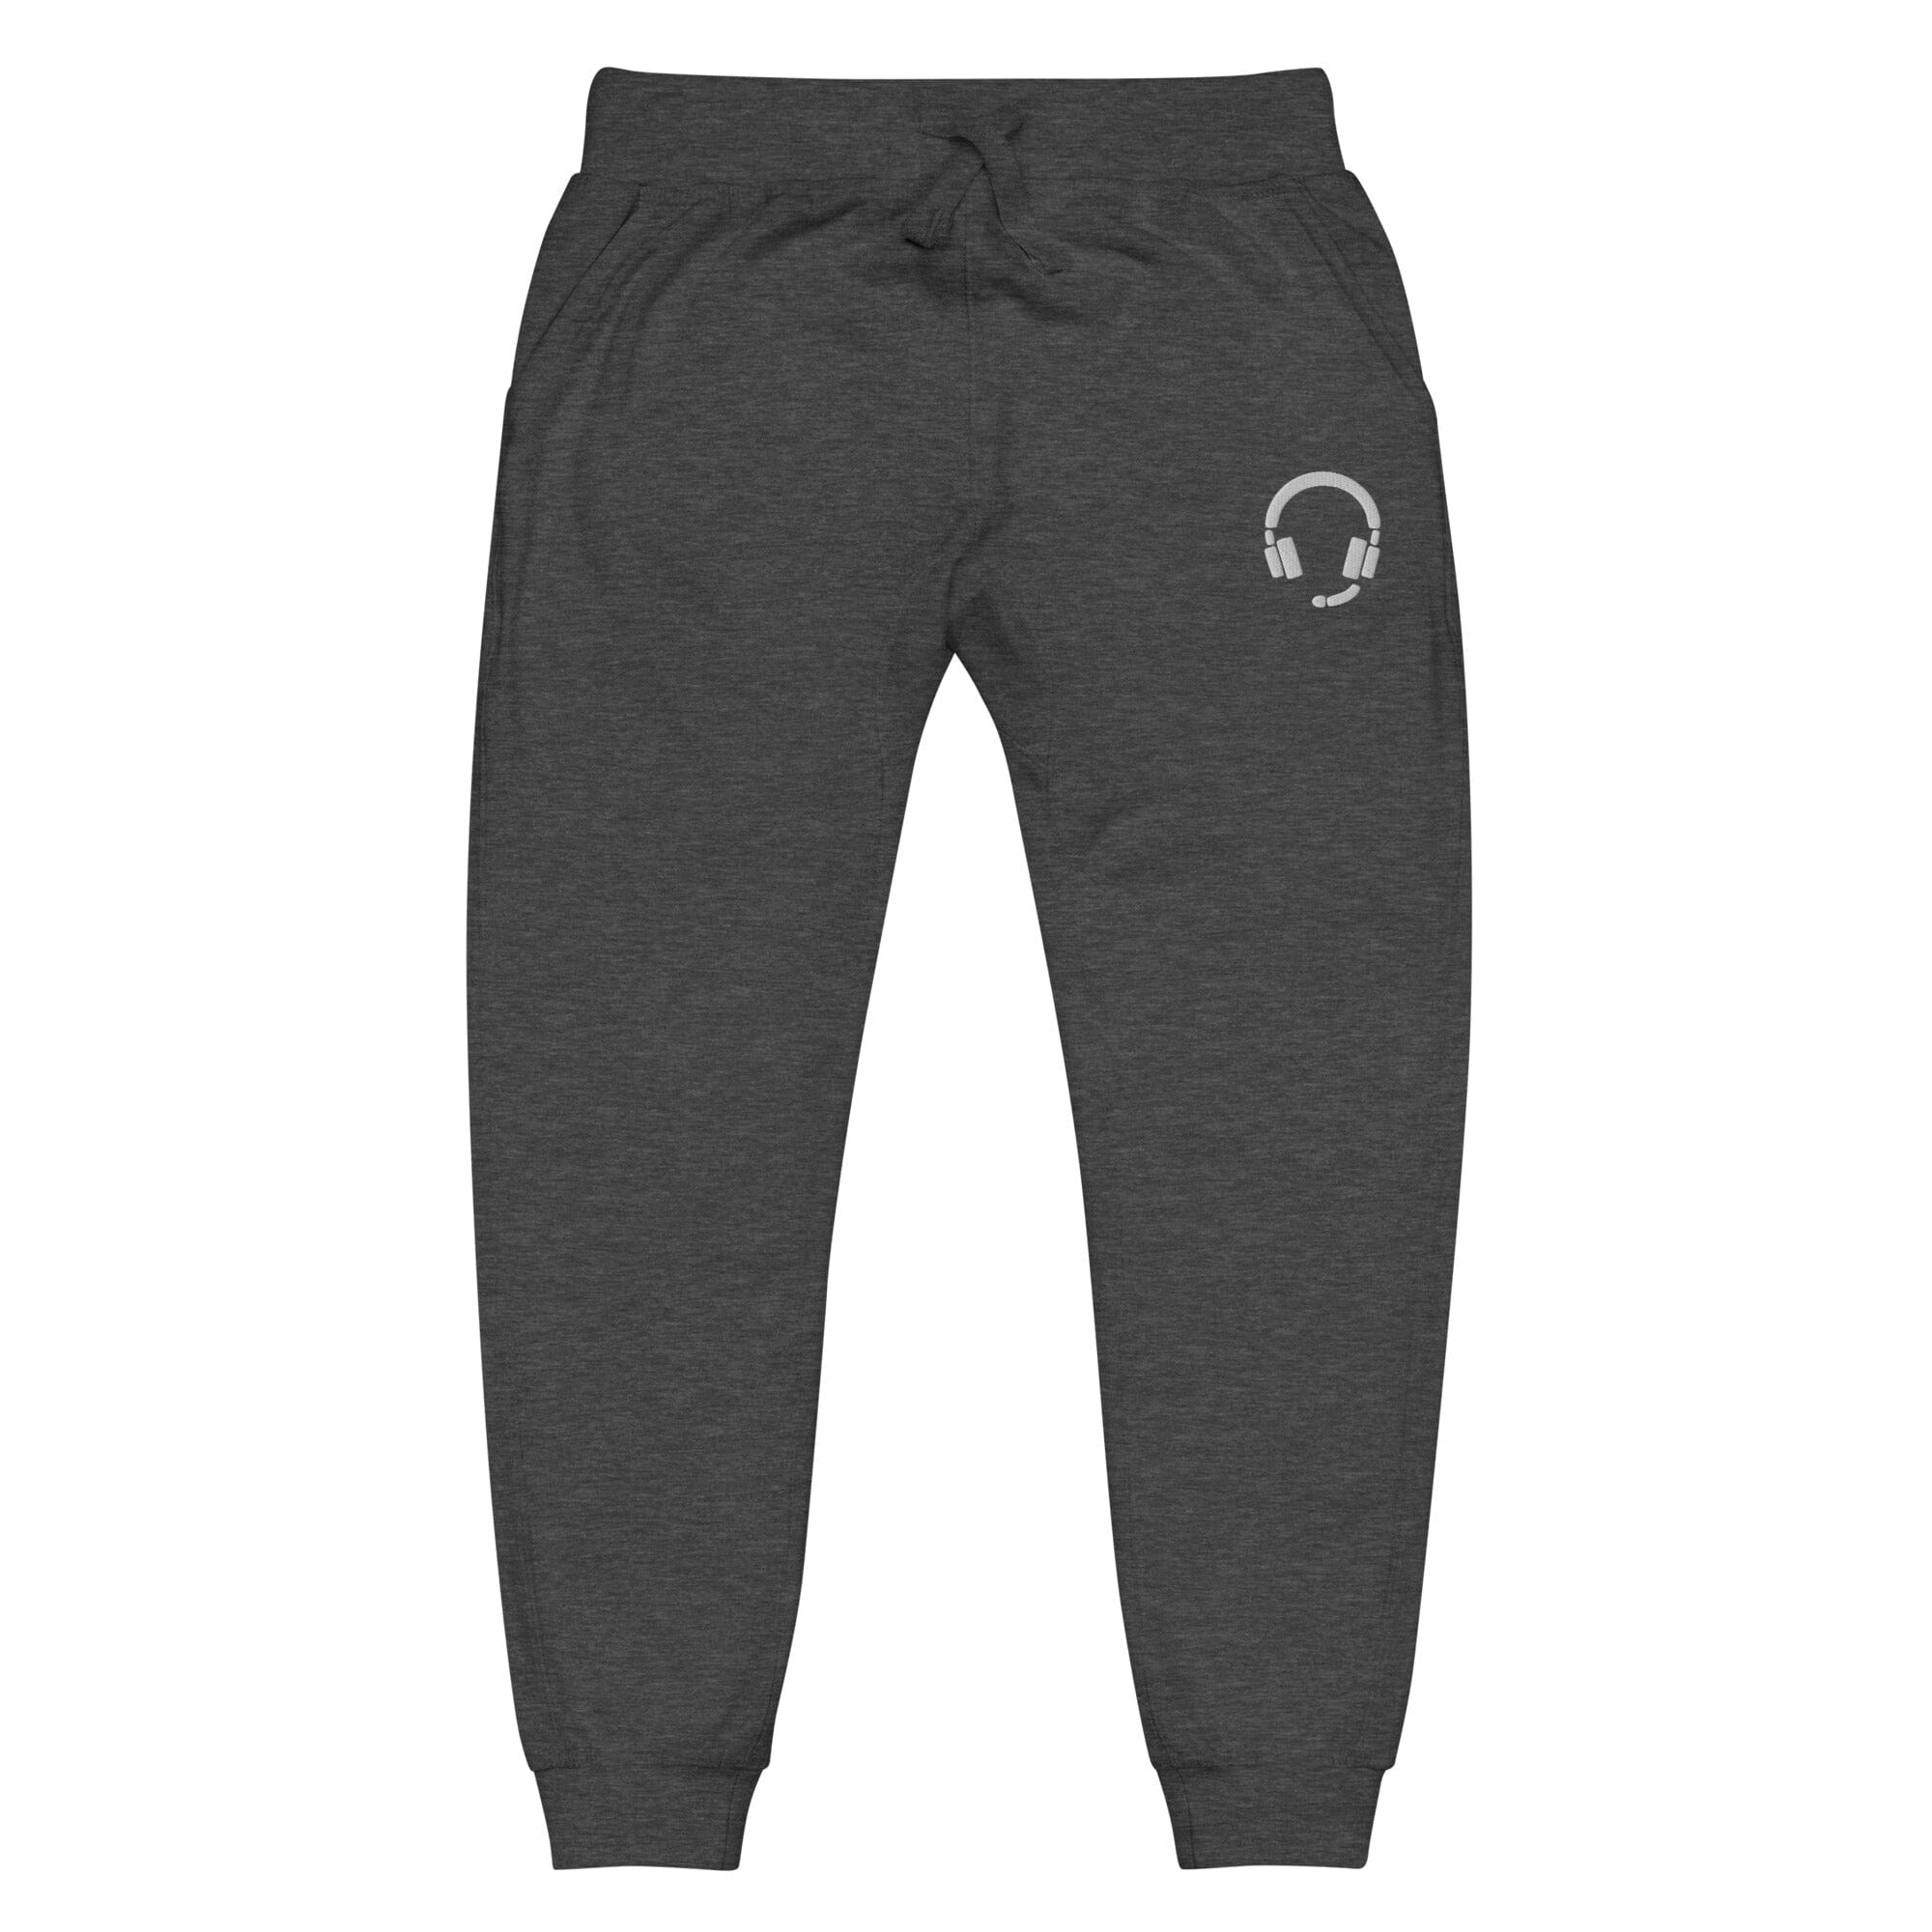 GLHF Headset | Unisex fleece sweatpants | Gamer Affirmations Threads & Thistles Inventory Charcoal Heather XS 